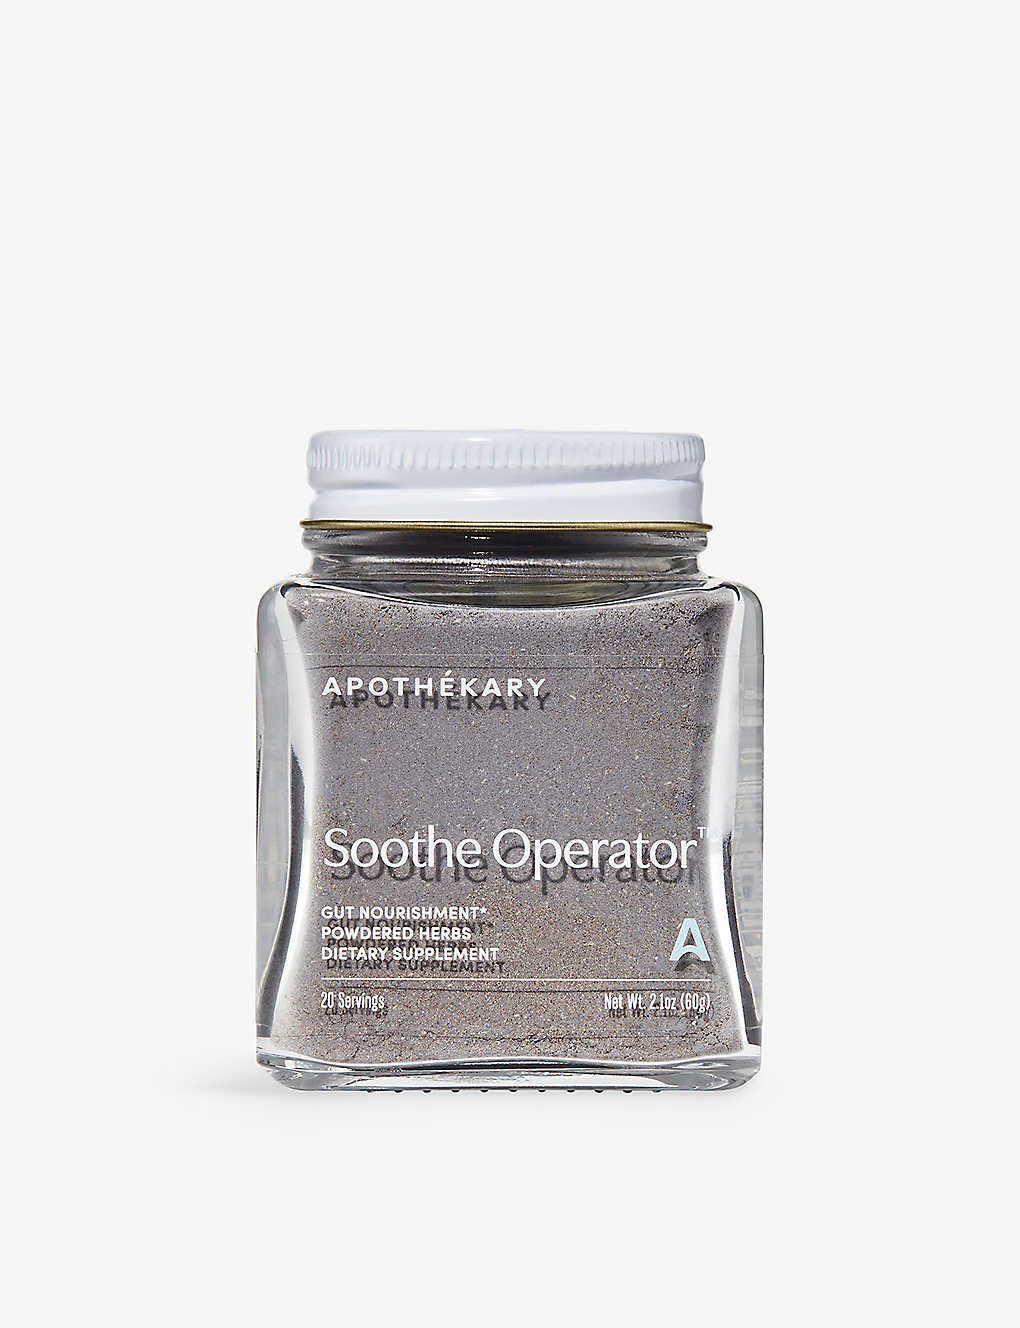 Apothekary Soothe Operator Herbal Supplement 60g